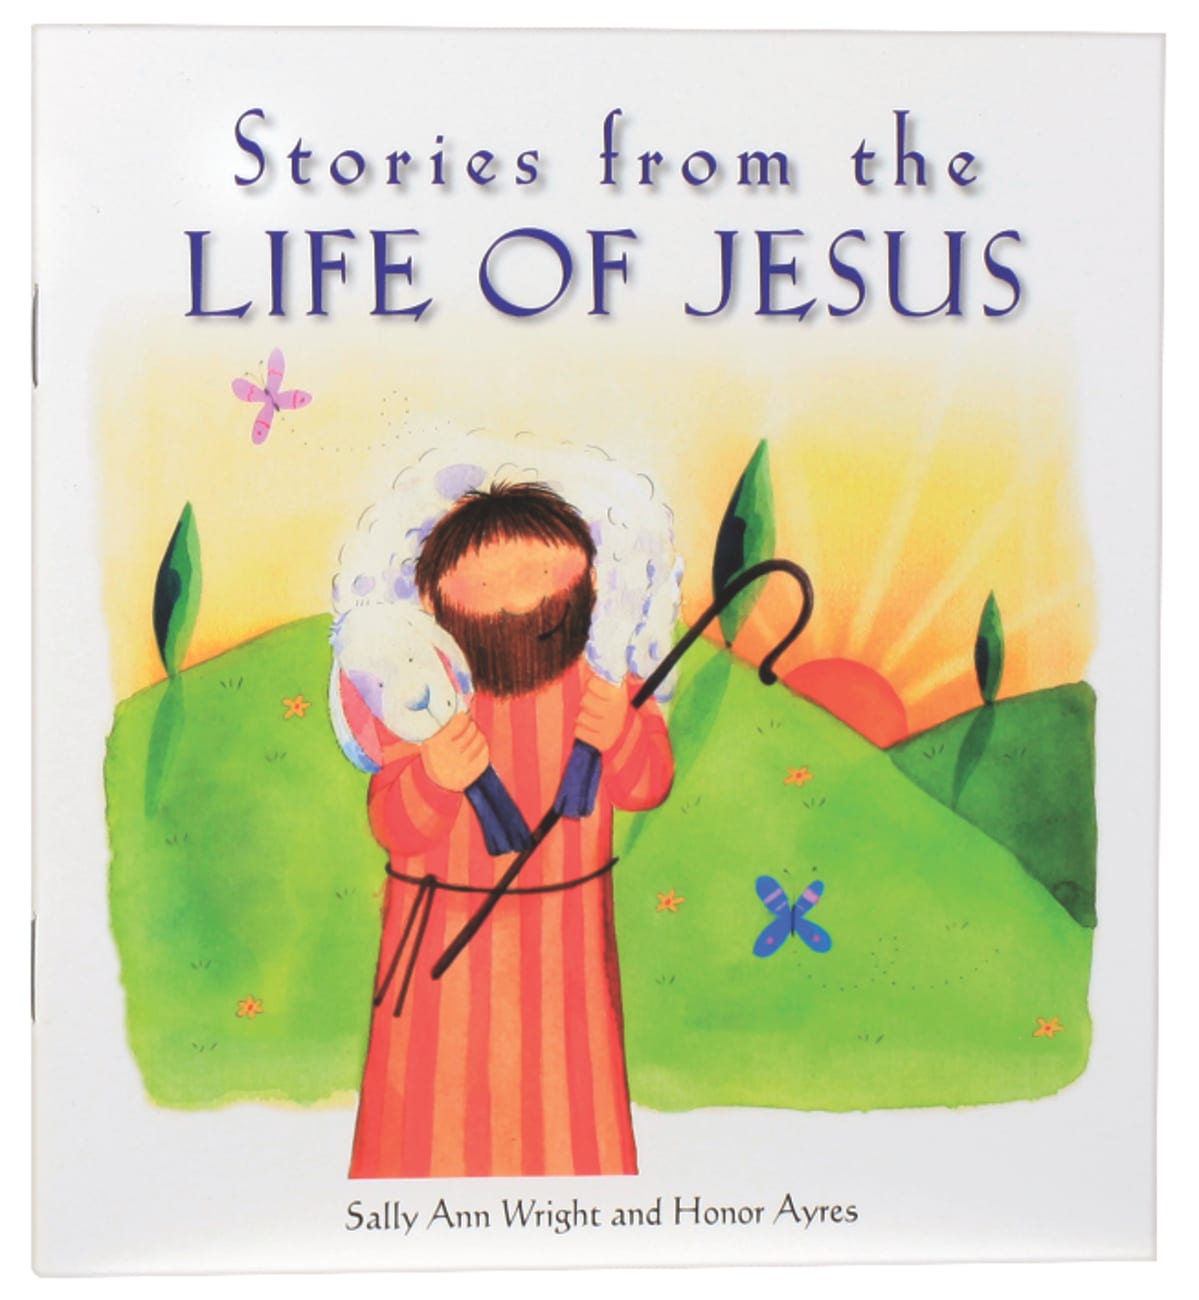 STORIES FROM THE LIFE OF JESUS